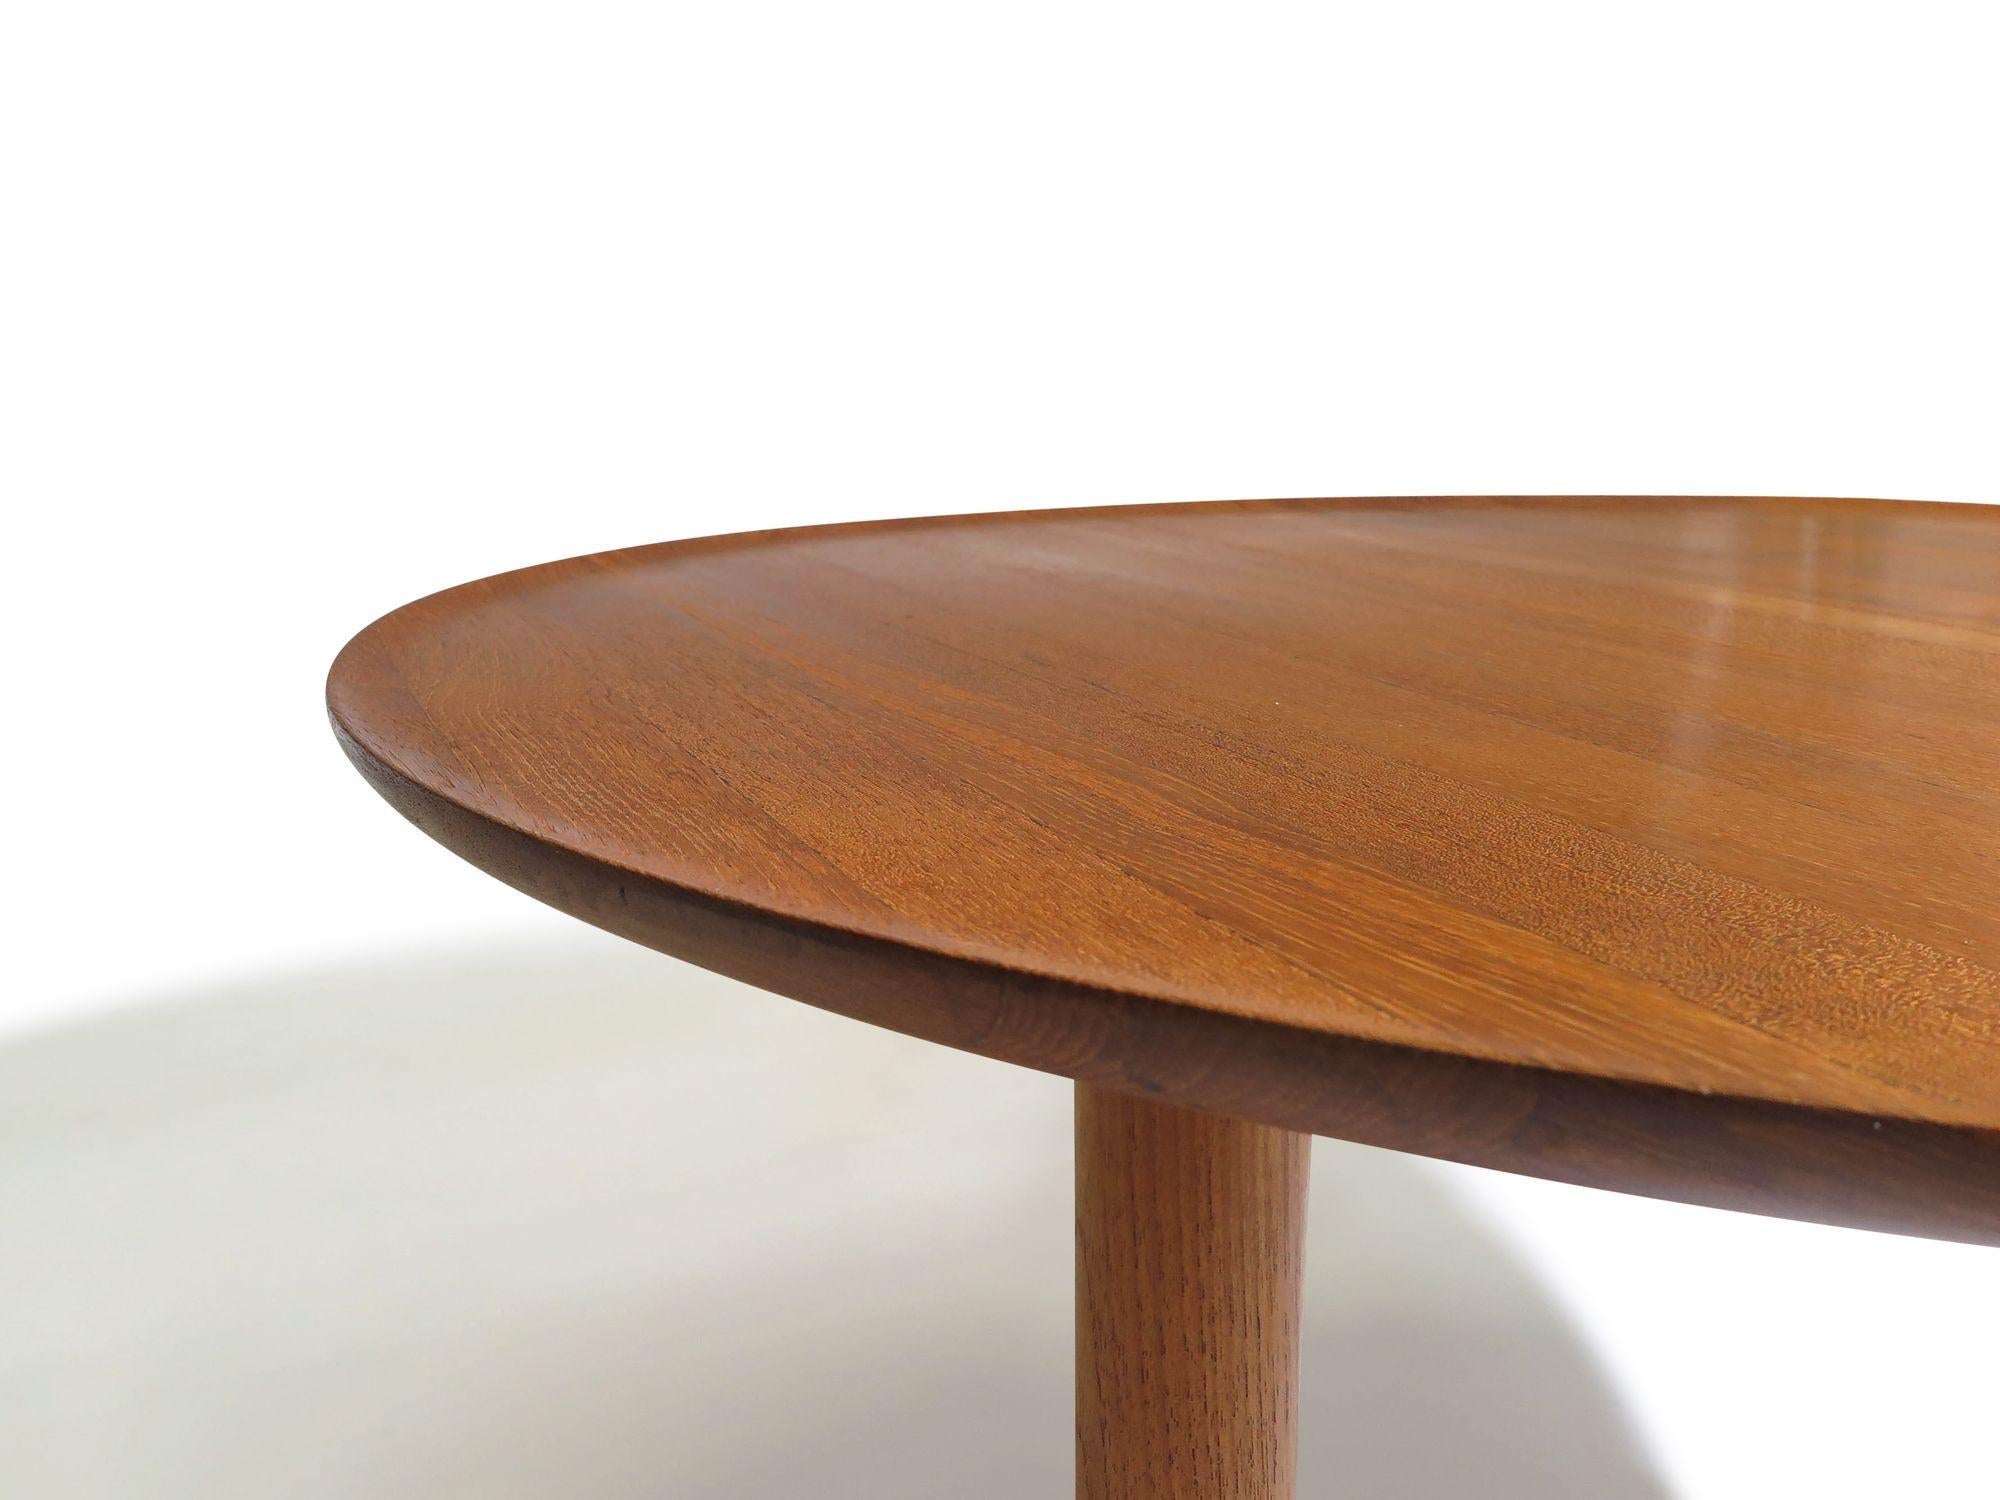 Elegant c.1955 Scandinavian coffee table of solid teak with sculpted edge, raised on tapered legs.
Measurements
W 31,5’’ x D 31,5’’ x H 18’’

